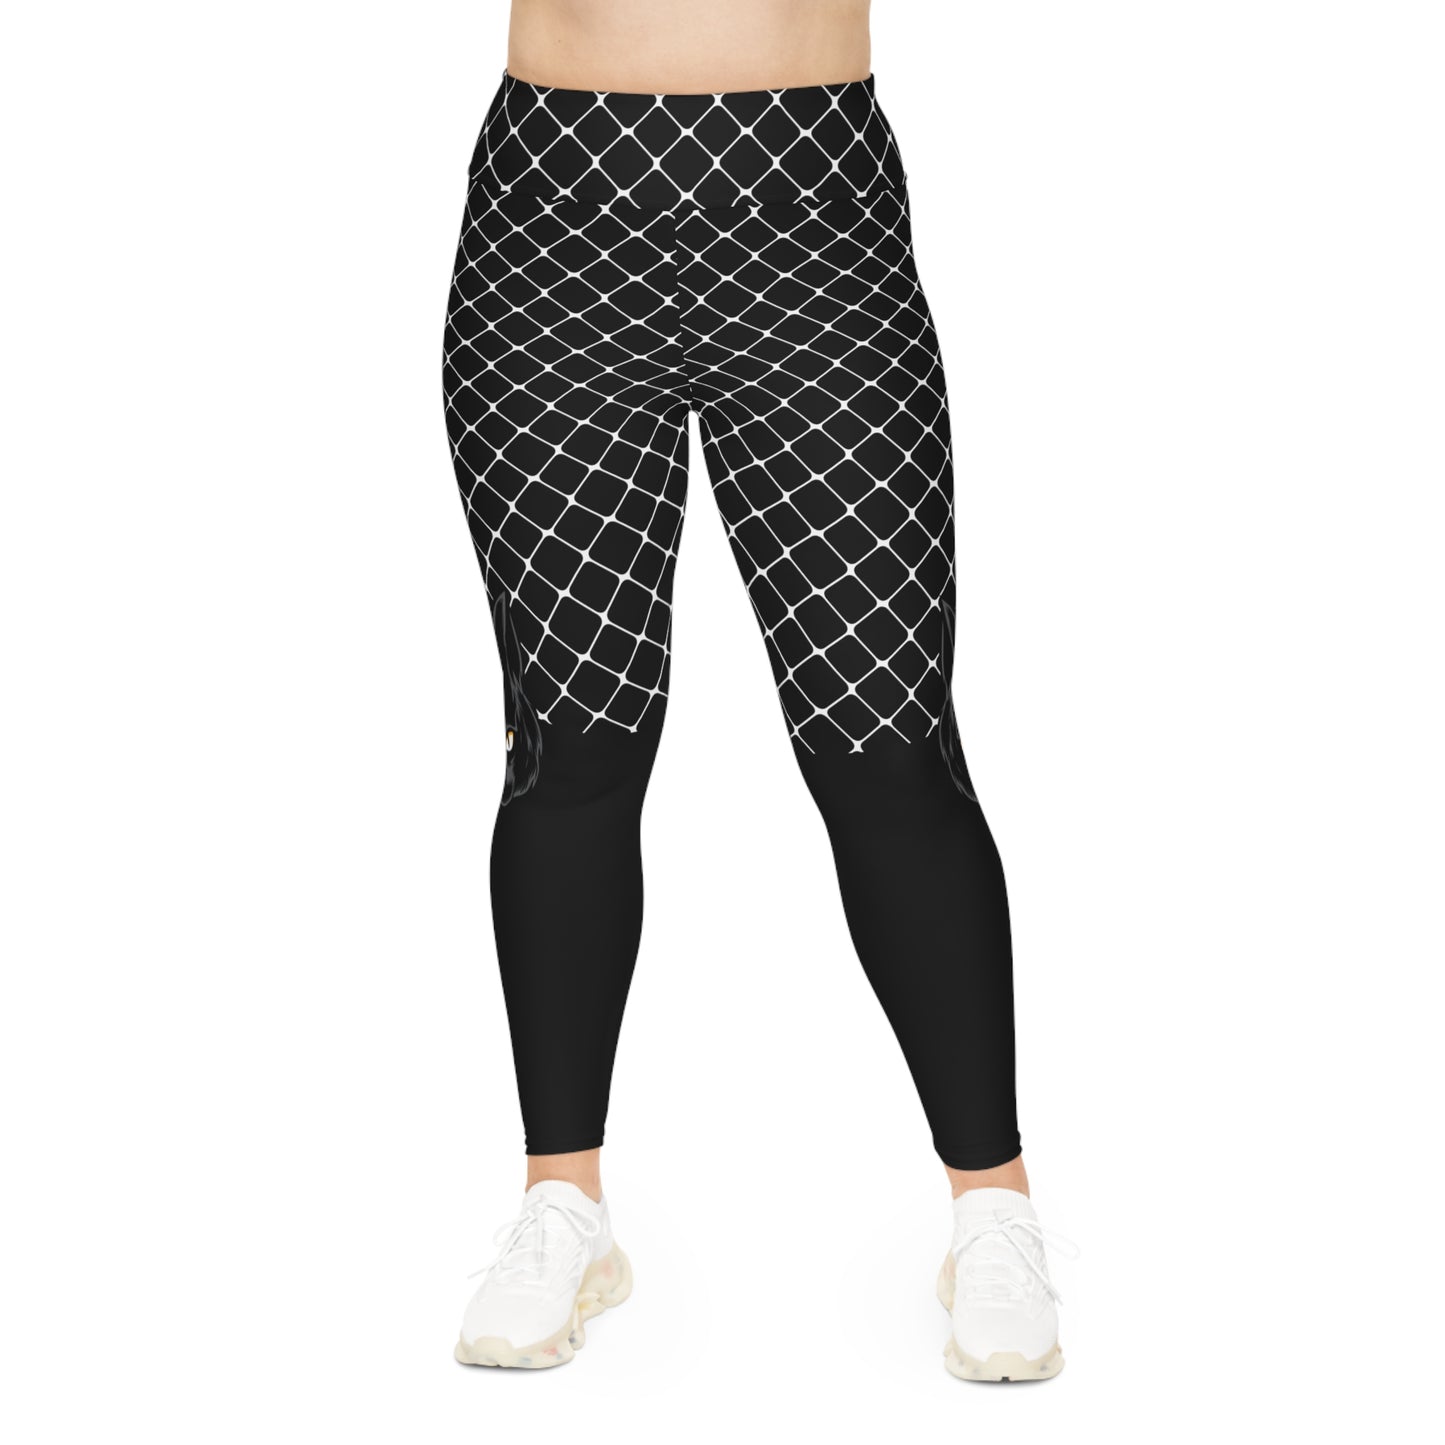 Gothic Plus Size Leggings One of a Kind Gift - Unique Workout Activewear tights for Mom fitness, Mothers Day, Girlfriend Christmas Gift